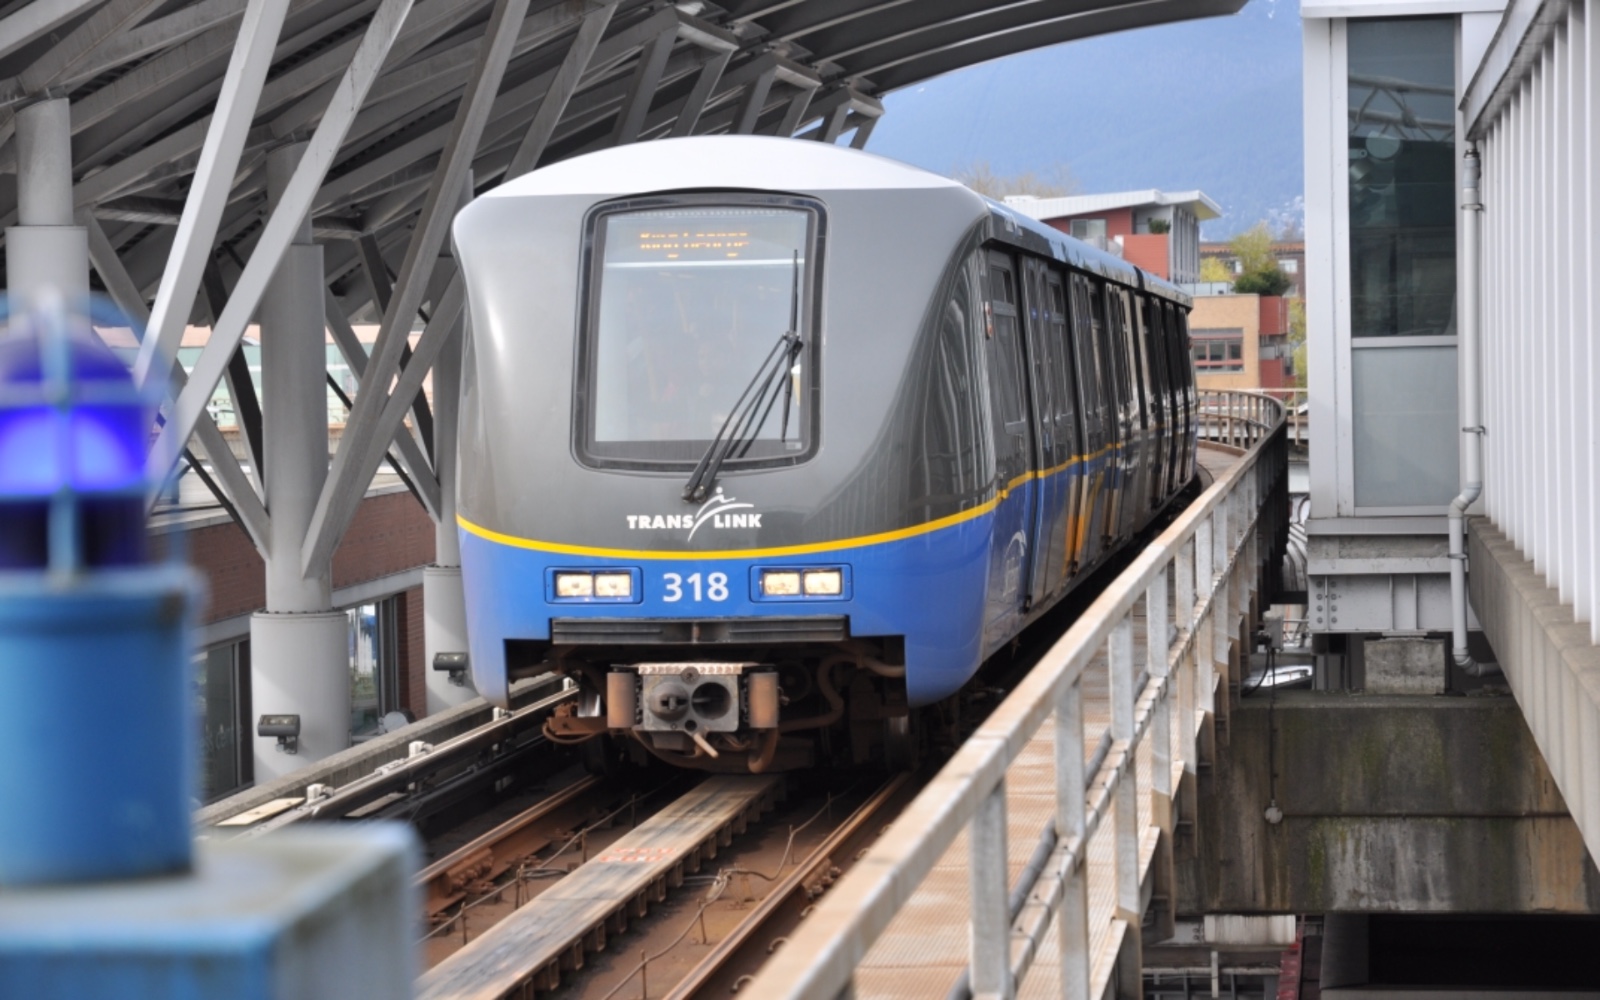 The skytrain arrives at a stop